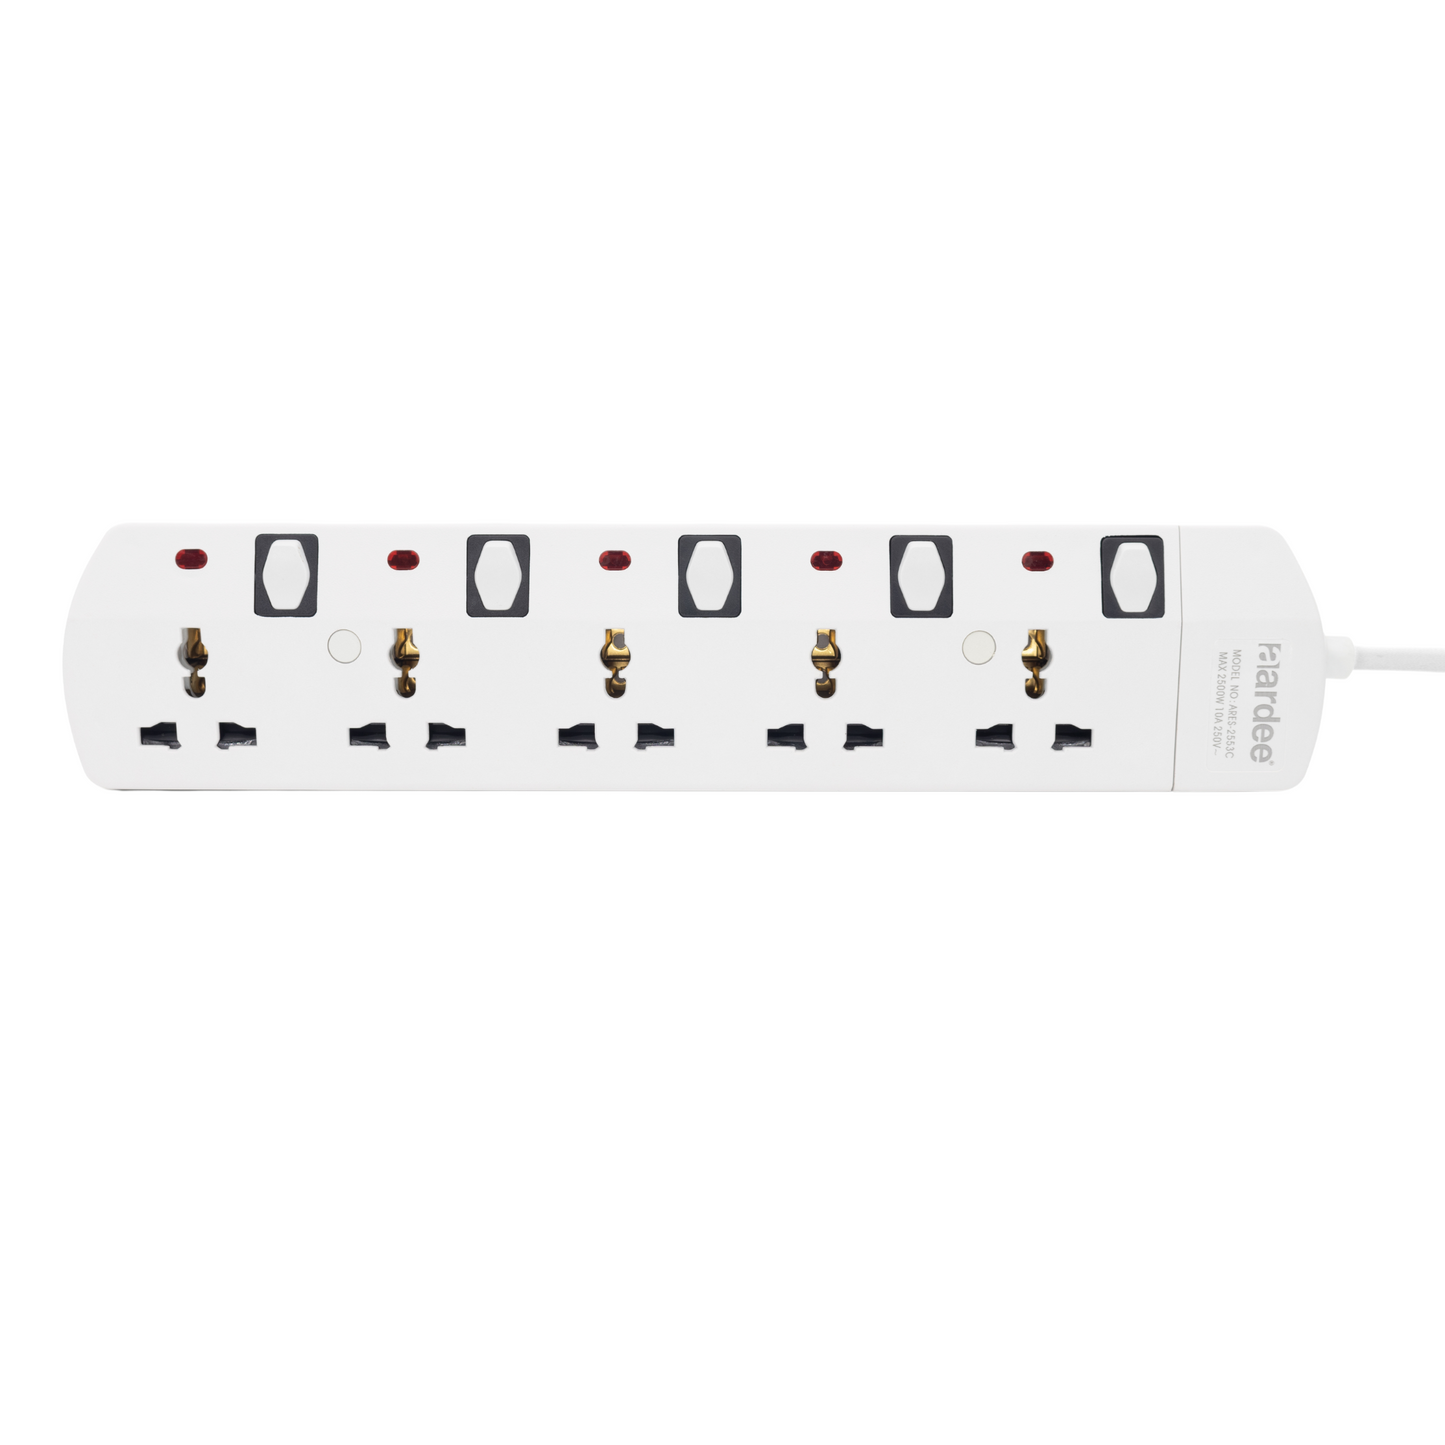 5 way 3 meter Extension Socket with 2000 watts power